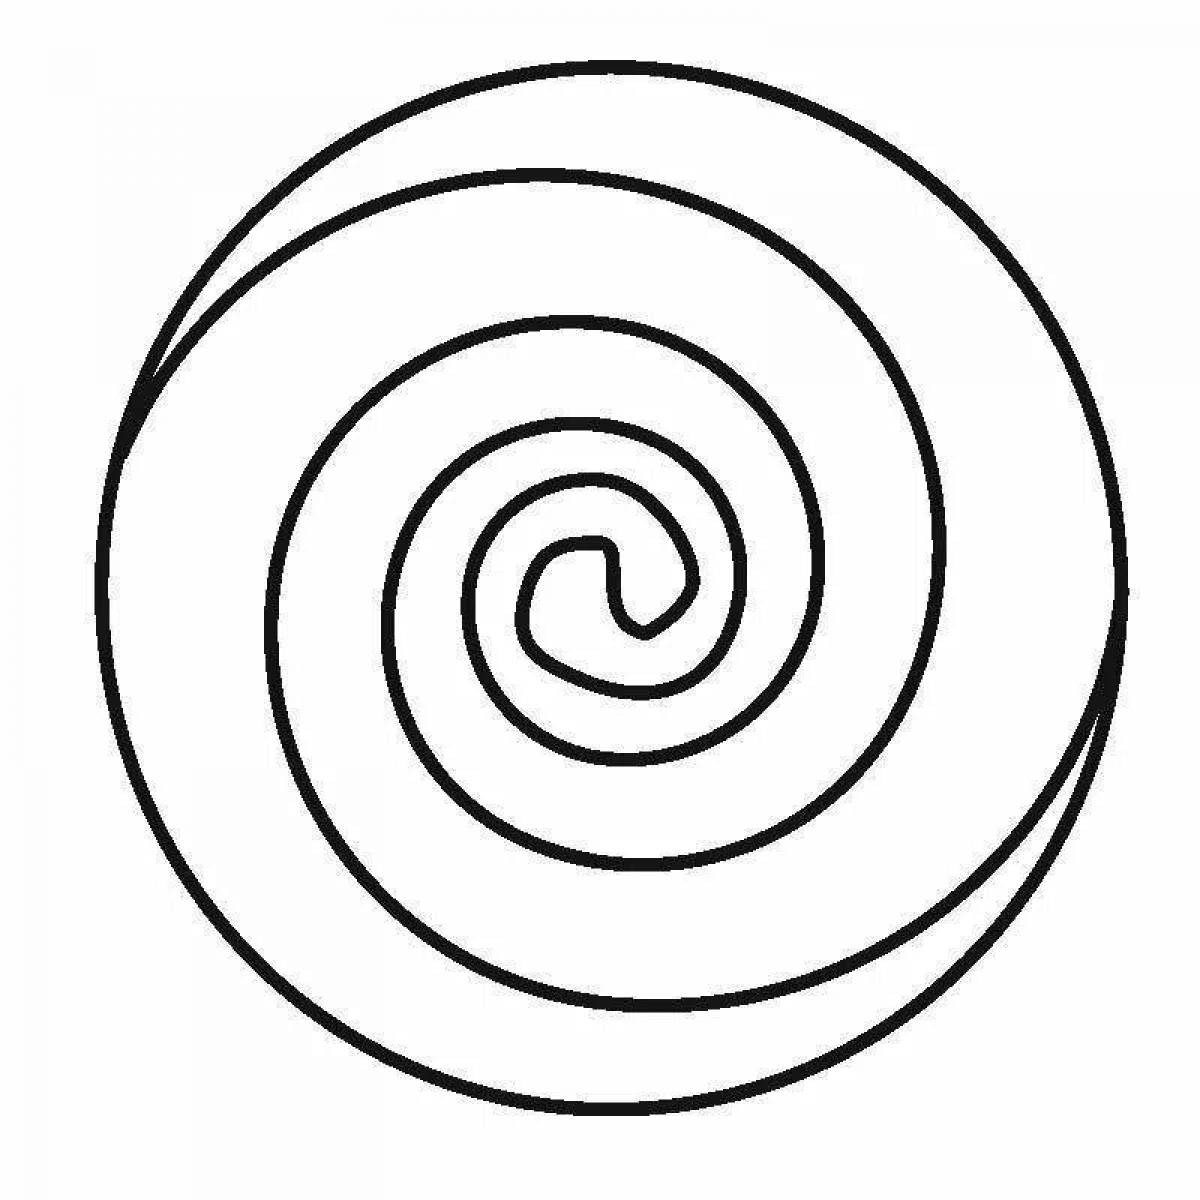 Charm creating spiral coloring page